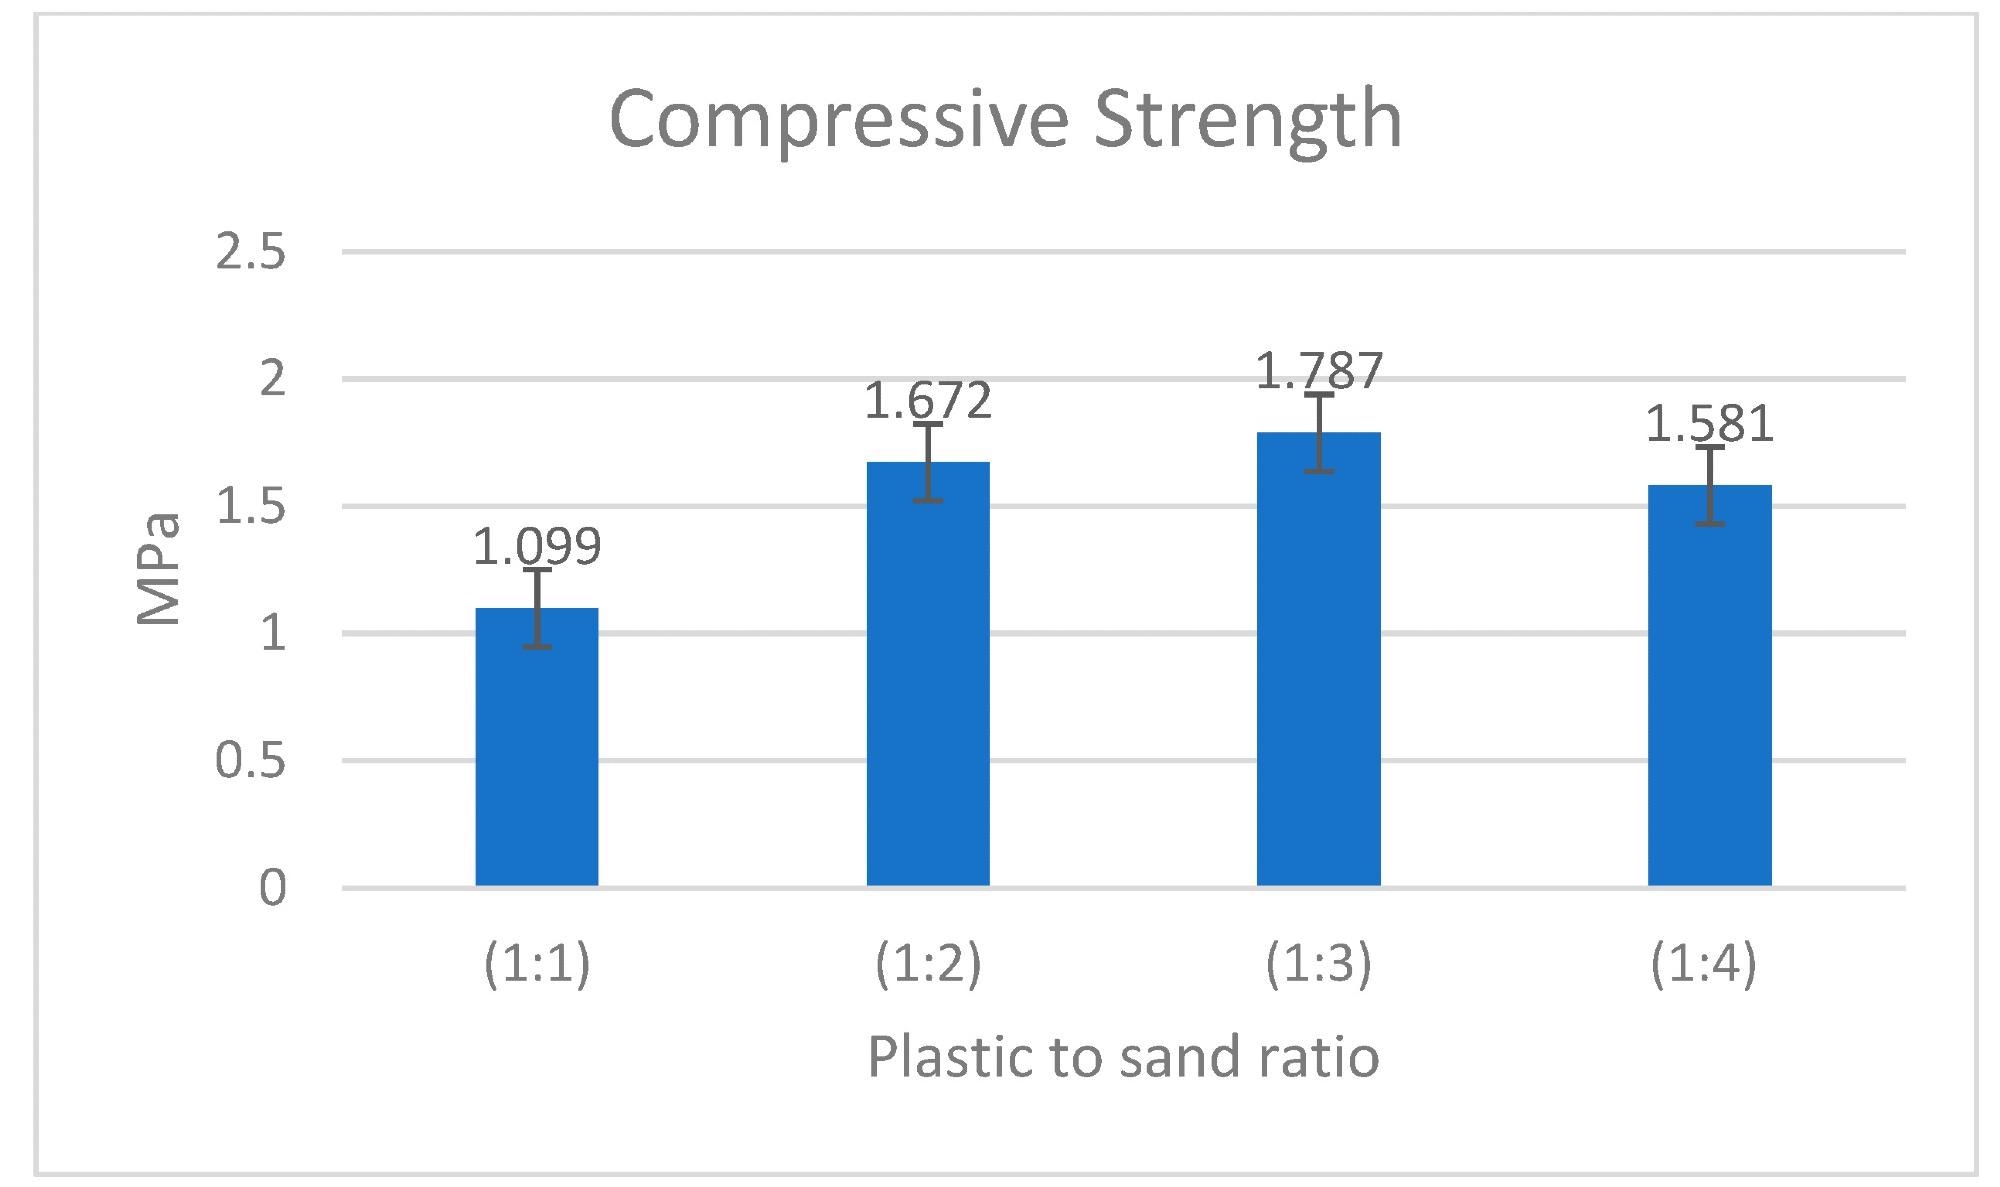 Compressive strength with various plastic to sand ratios.